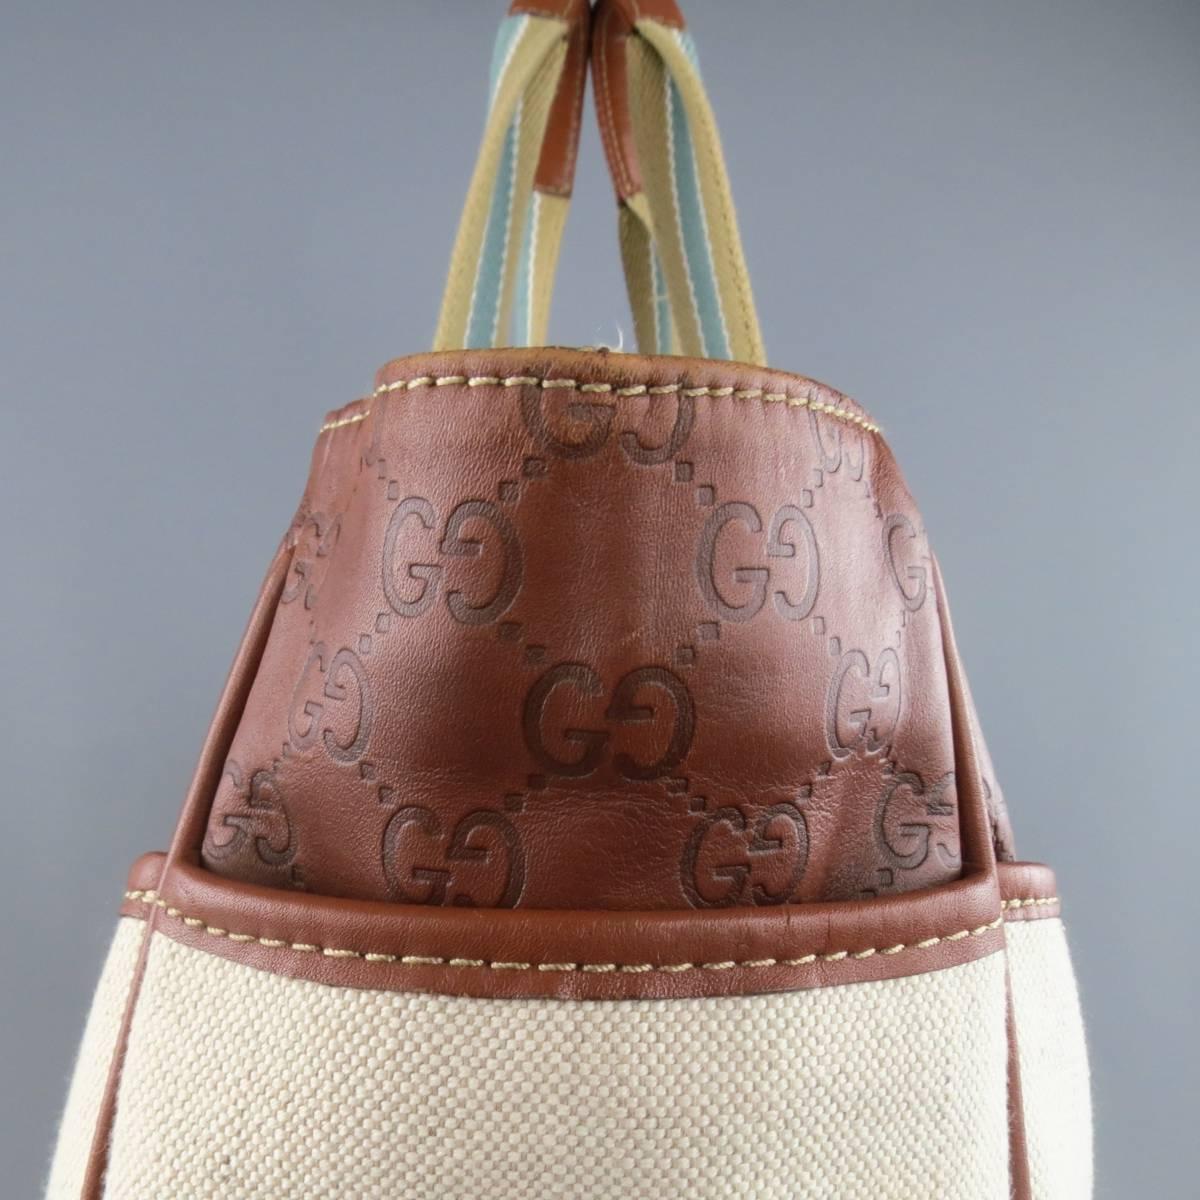 Women's or Men's GUCCI Beige Canvas & Guccissima Embossed Leather Tote Bag